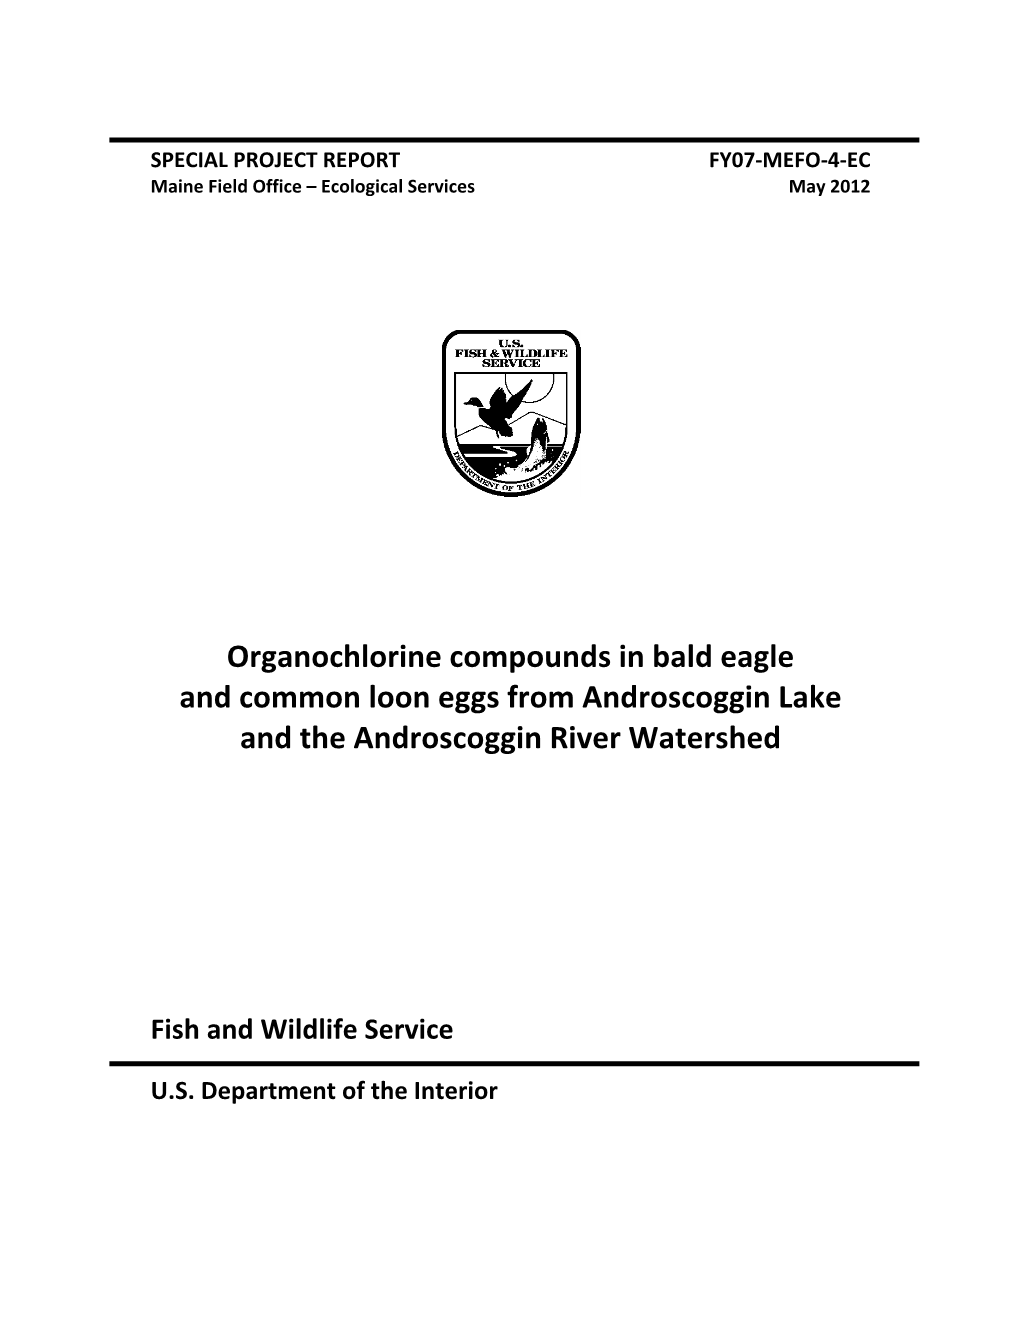 Organochlorine Compounds in Bald Eagle and Common Loon Eggs from Androscoggin Lake and the Androscoggin River Watershed